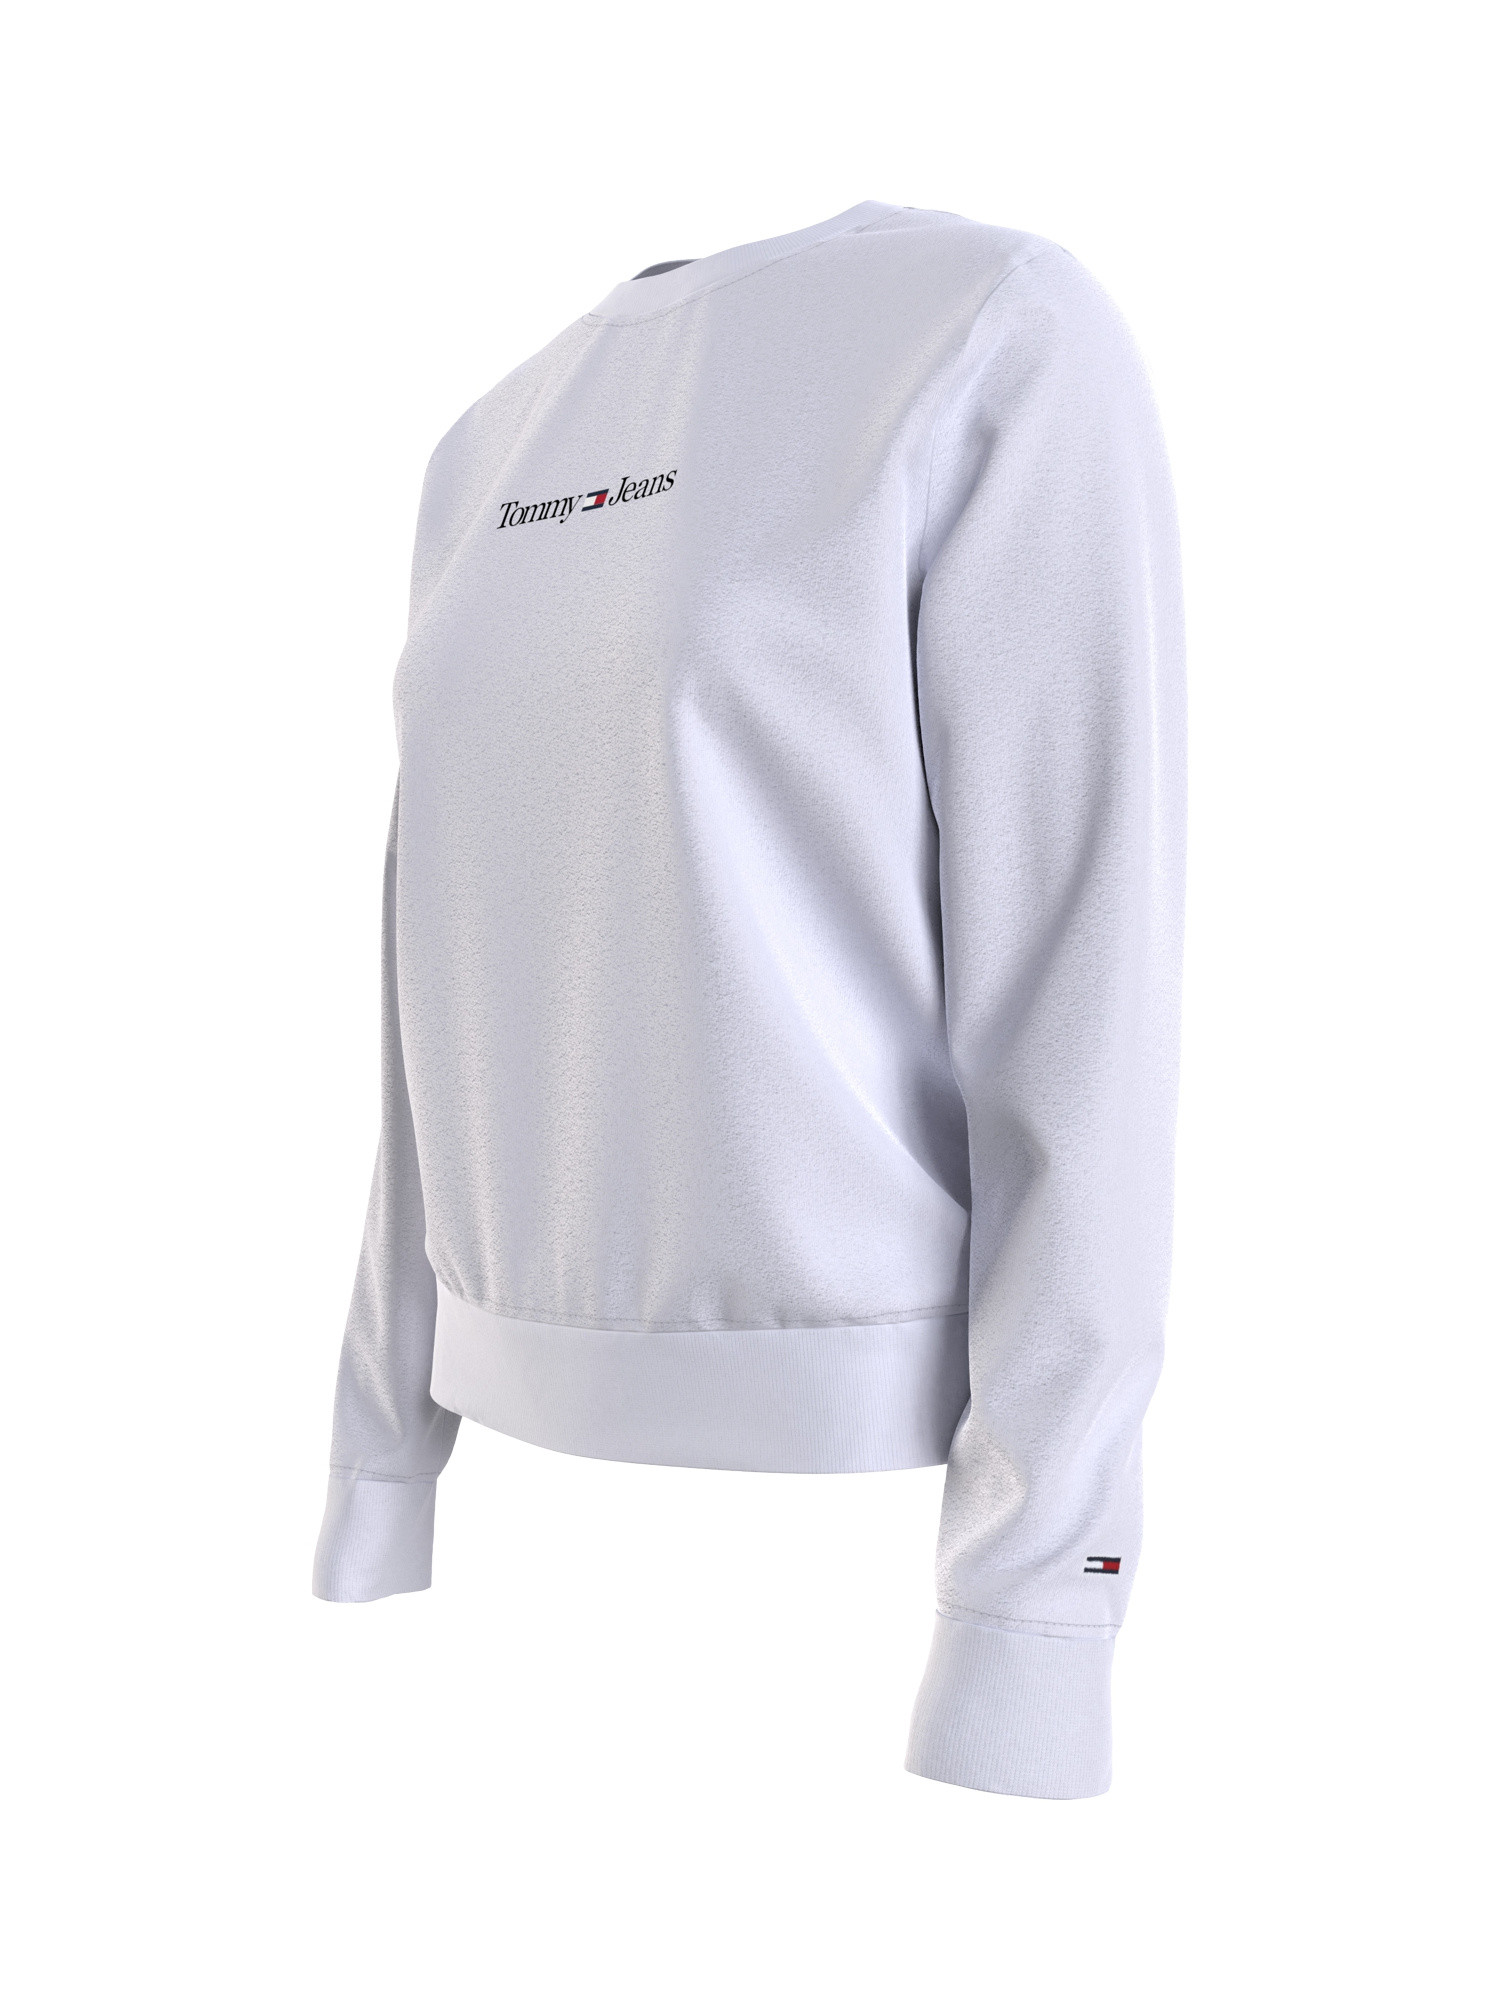 Tommy Jeans - Felpa girocollo in cotone con logo, Bianco, large image number 2